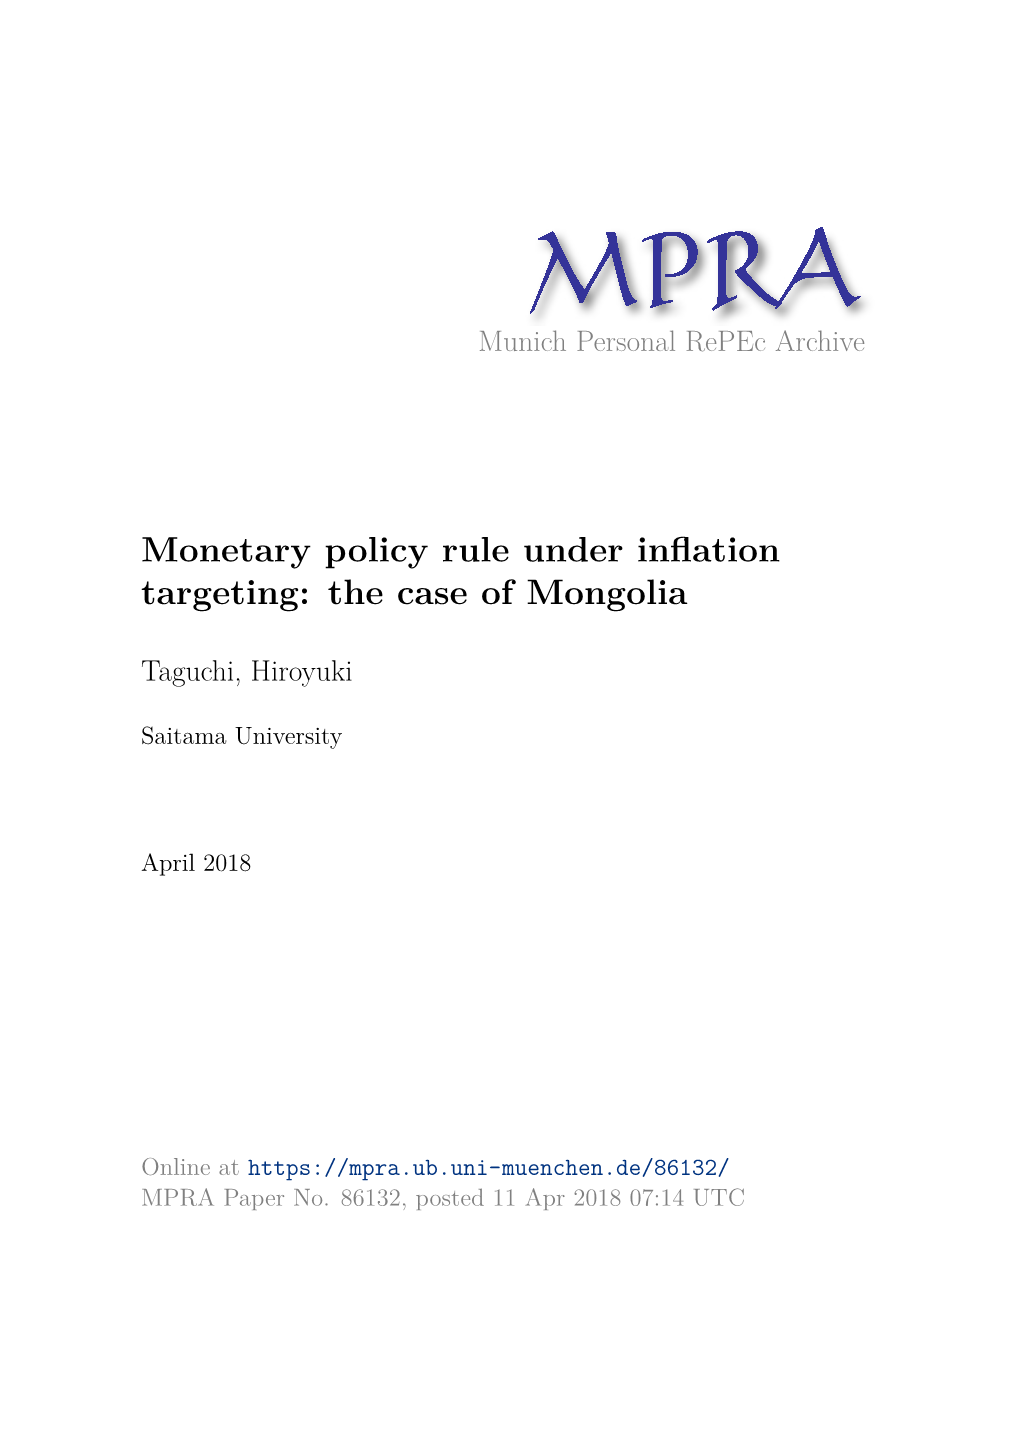 Monetary Policy Rule Under Inflation Targeting: the Case of Mongolia